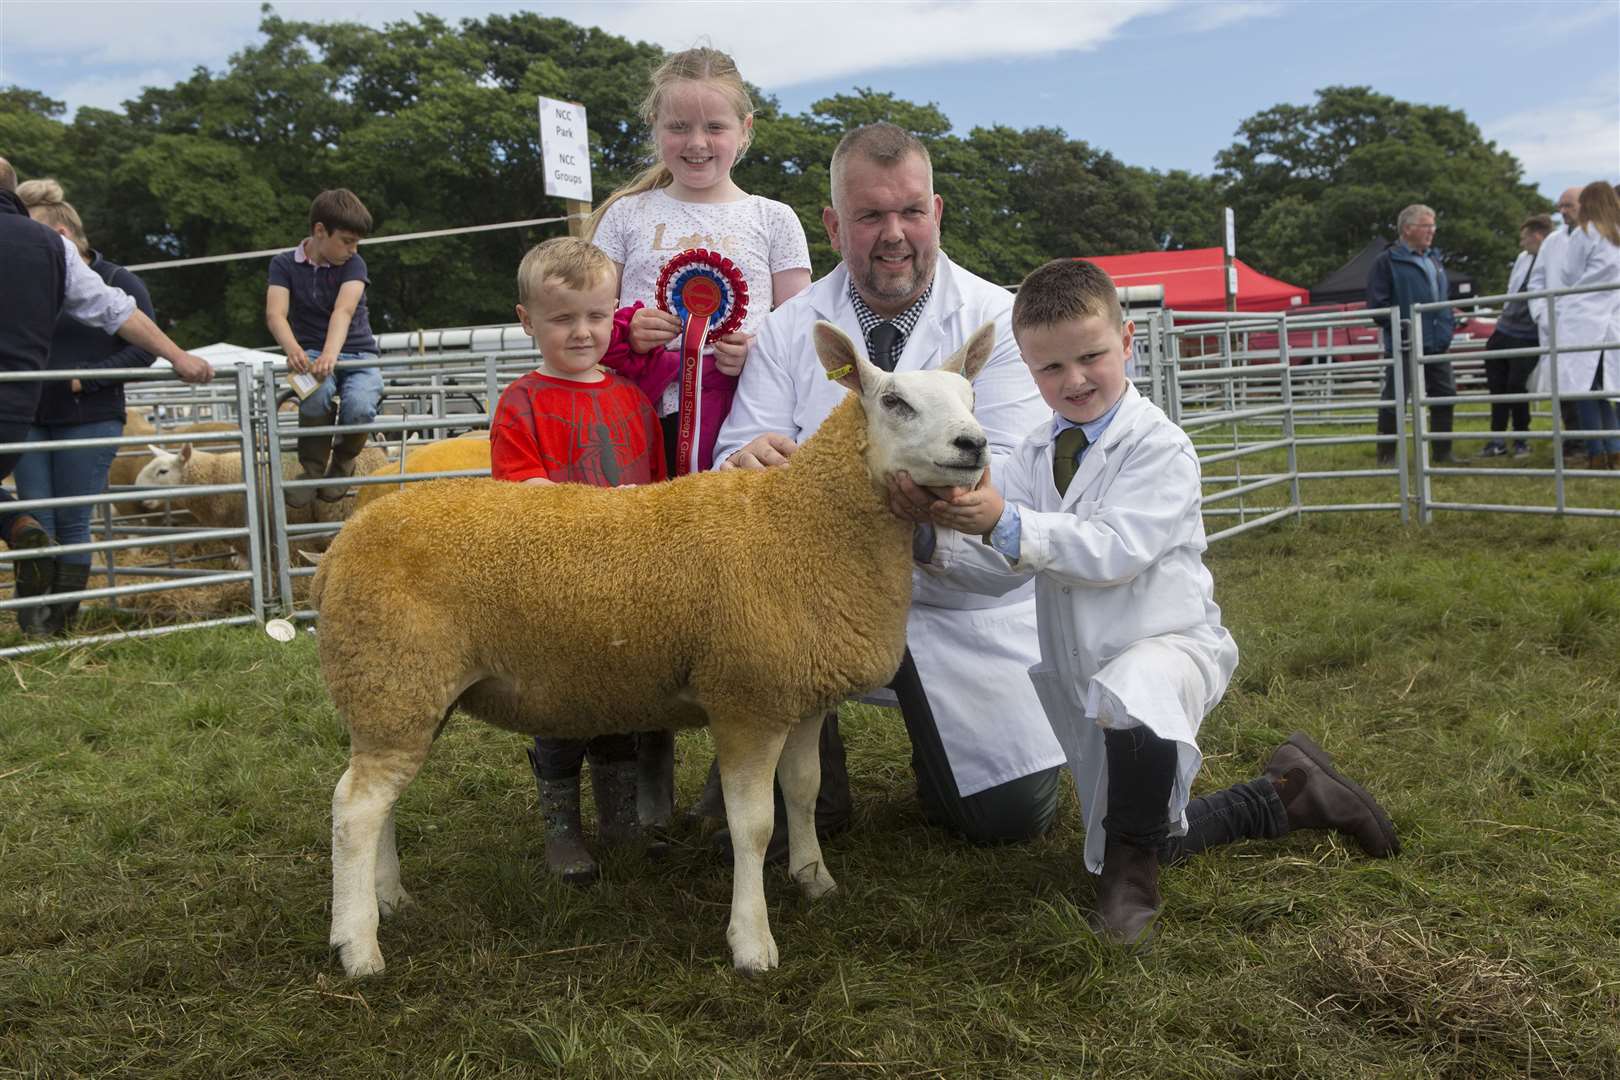 The supreme sheep championship and cross sheep championship went to Messrs Sutherland, Sibmister and Stainland Farms. Their champion was a home-bred, March-born, three-quarter Texel ewe lamb by a home-bred sire. Holding the champion is Kenneth Sutherland Jnr with his children Tom, Amy and Jack. Picture: Robert MacDonald / Northern Studios